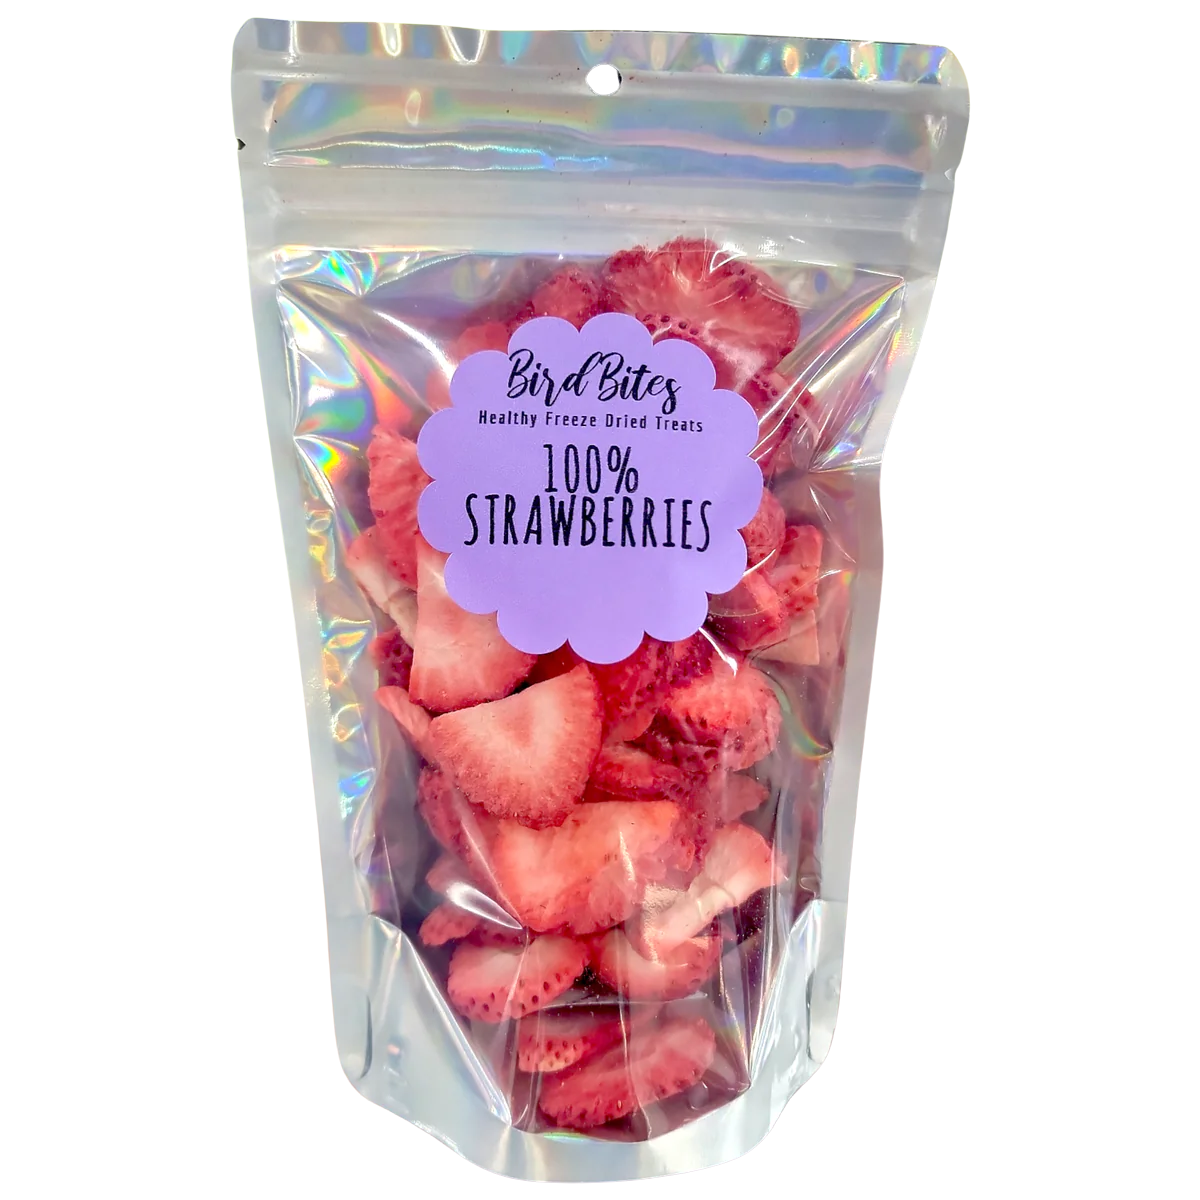 100% Freeze Dried Strawberries by Bird Bites Generous 1 Cup Size